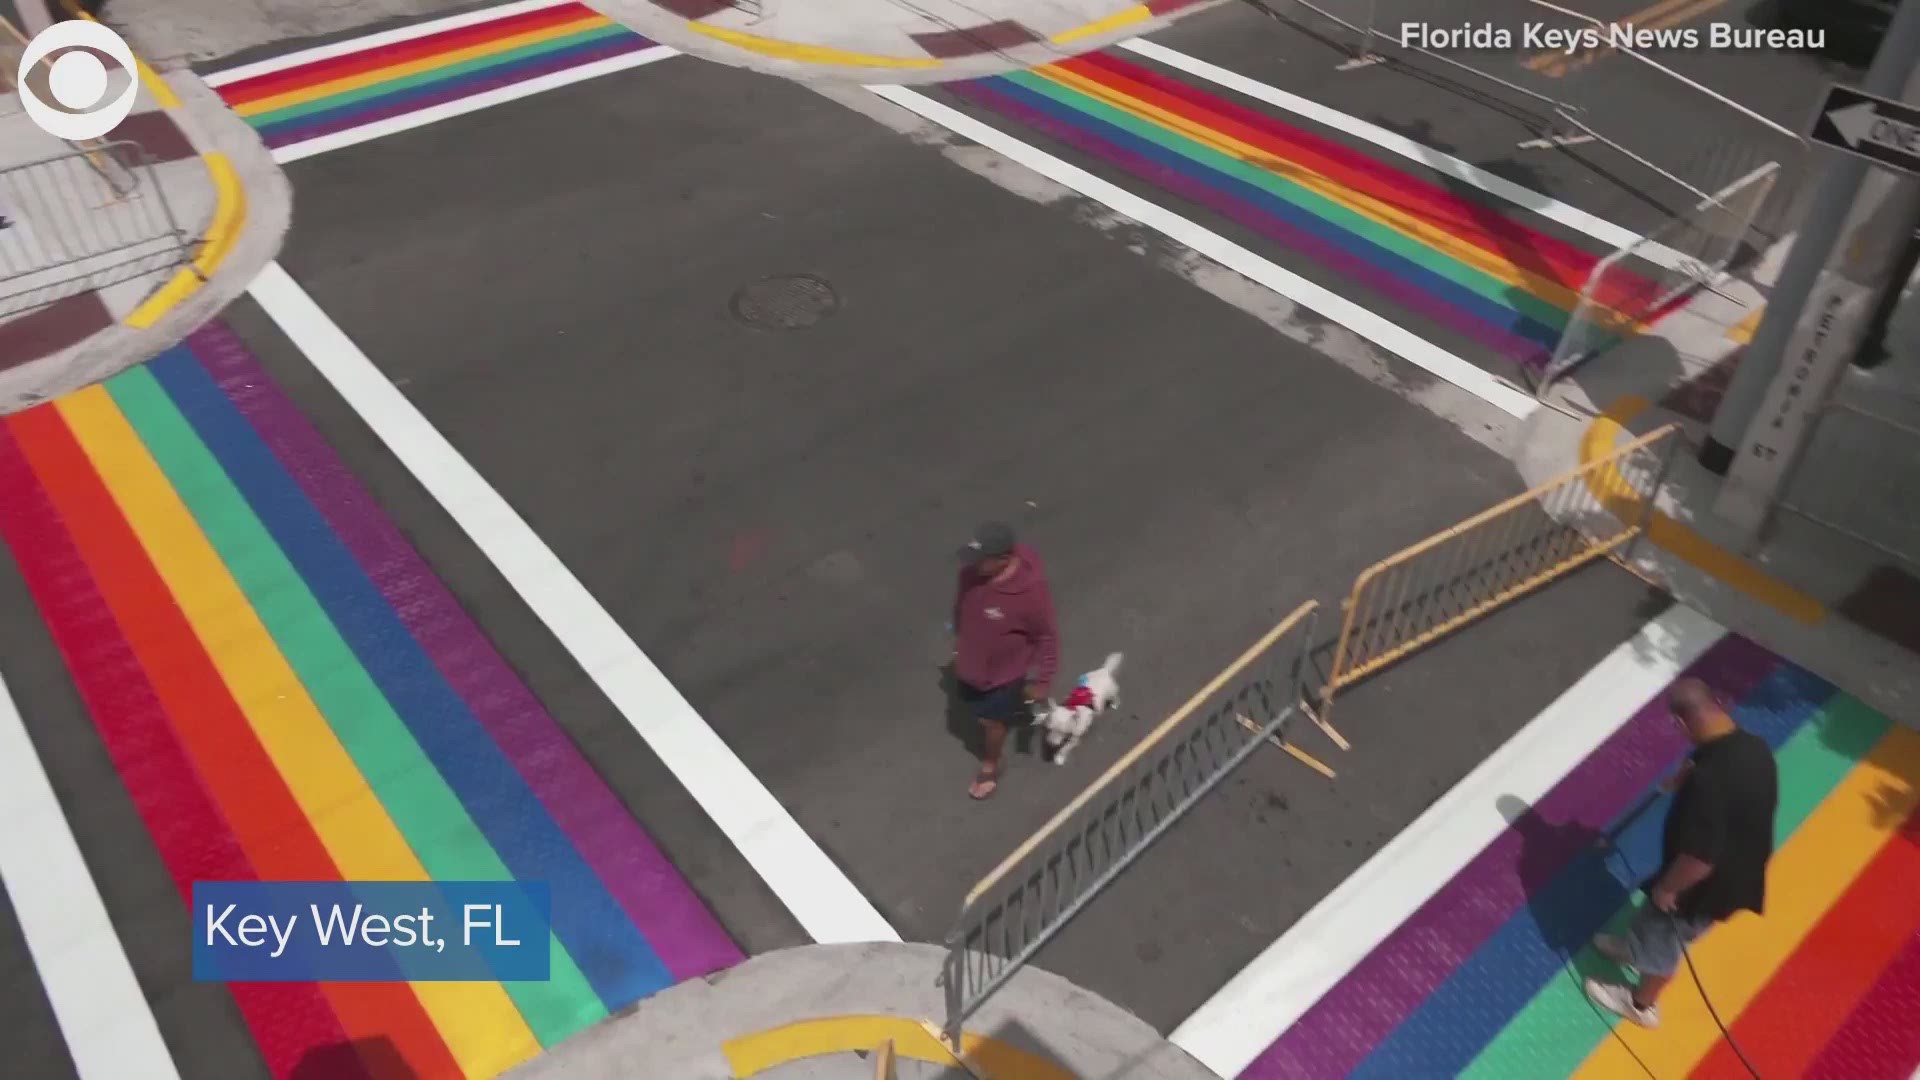 New rainbow crosswalks were installed on Monday at the intersection of Duval and Petronia streets in Key West, Florida.